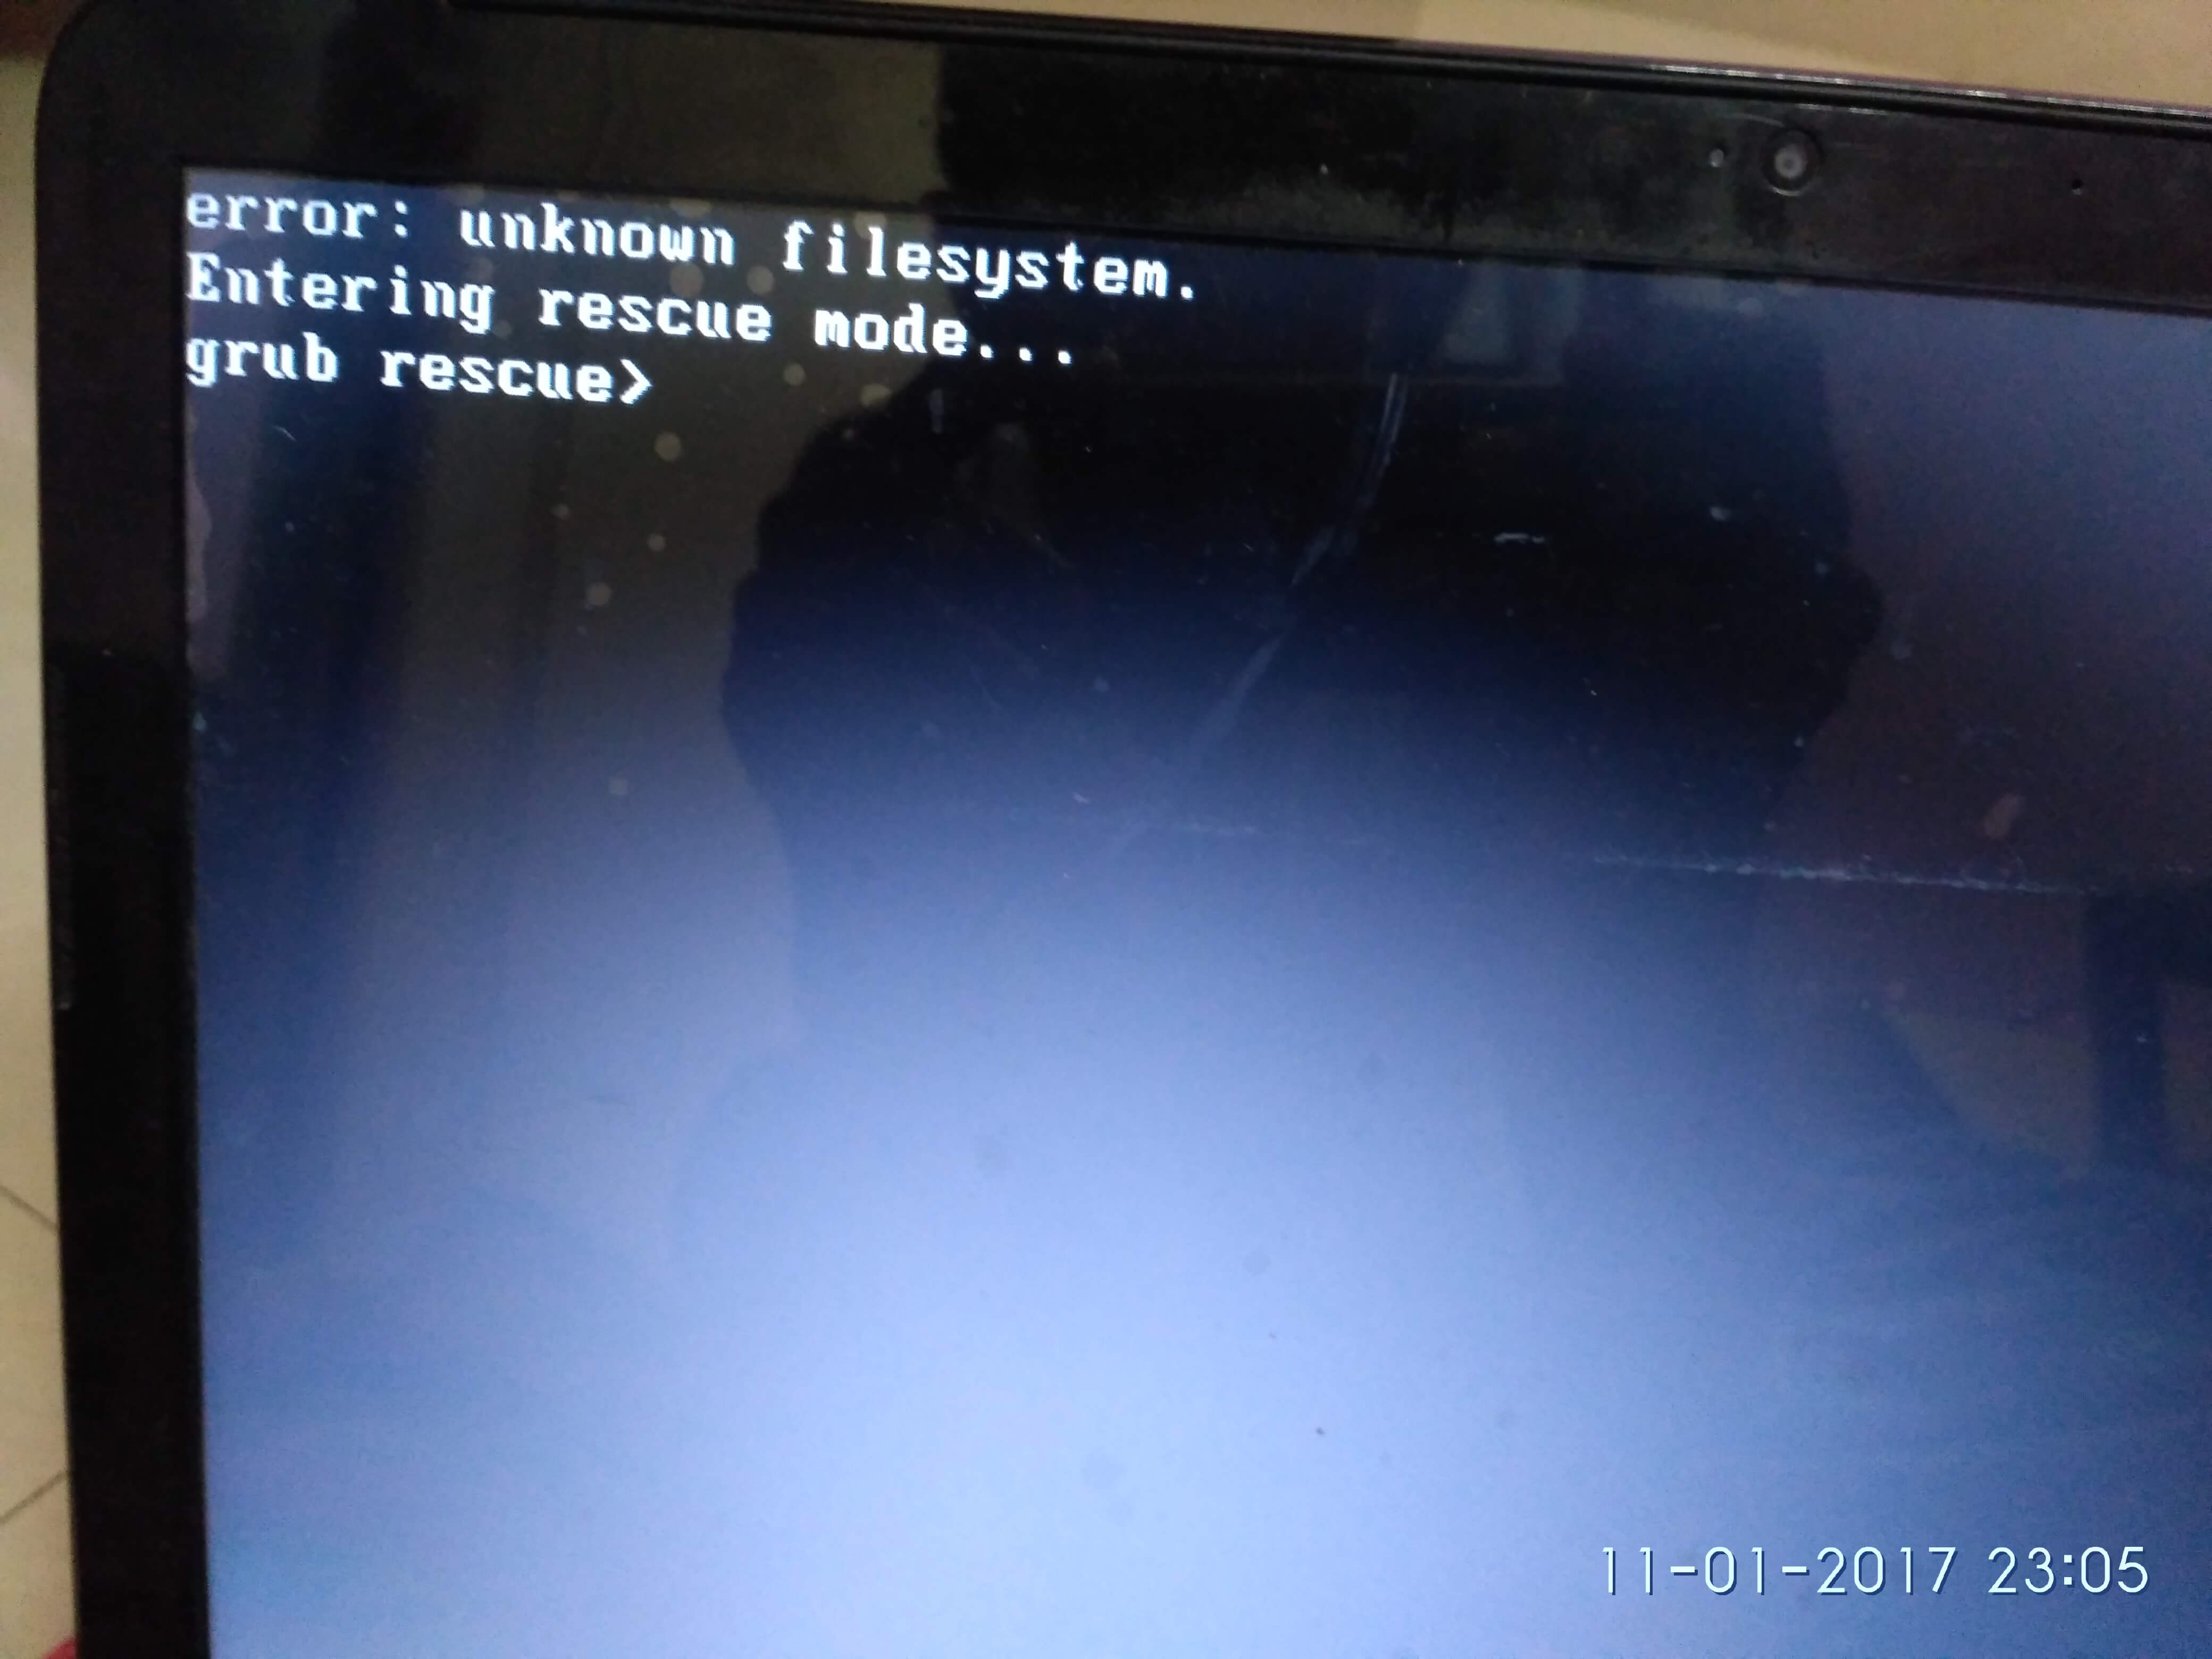 While Secure boot is disable